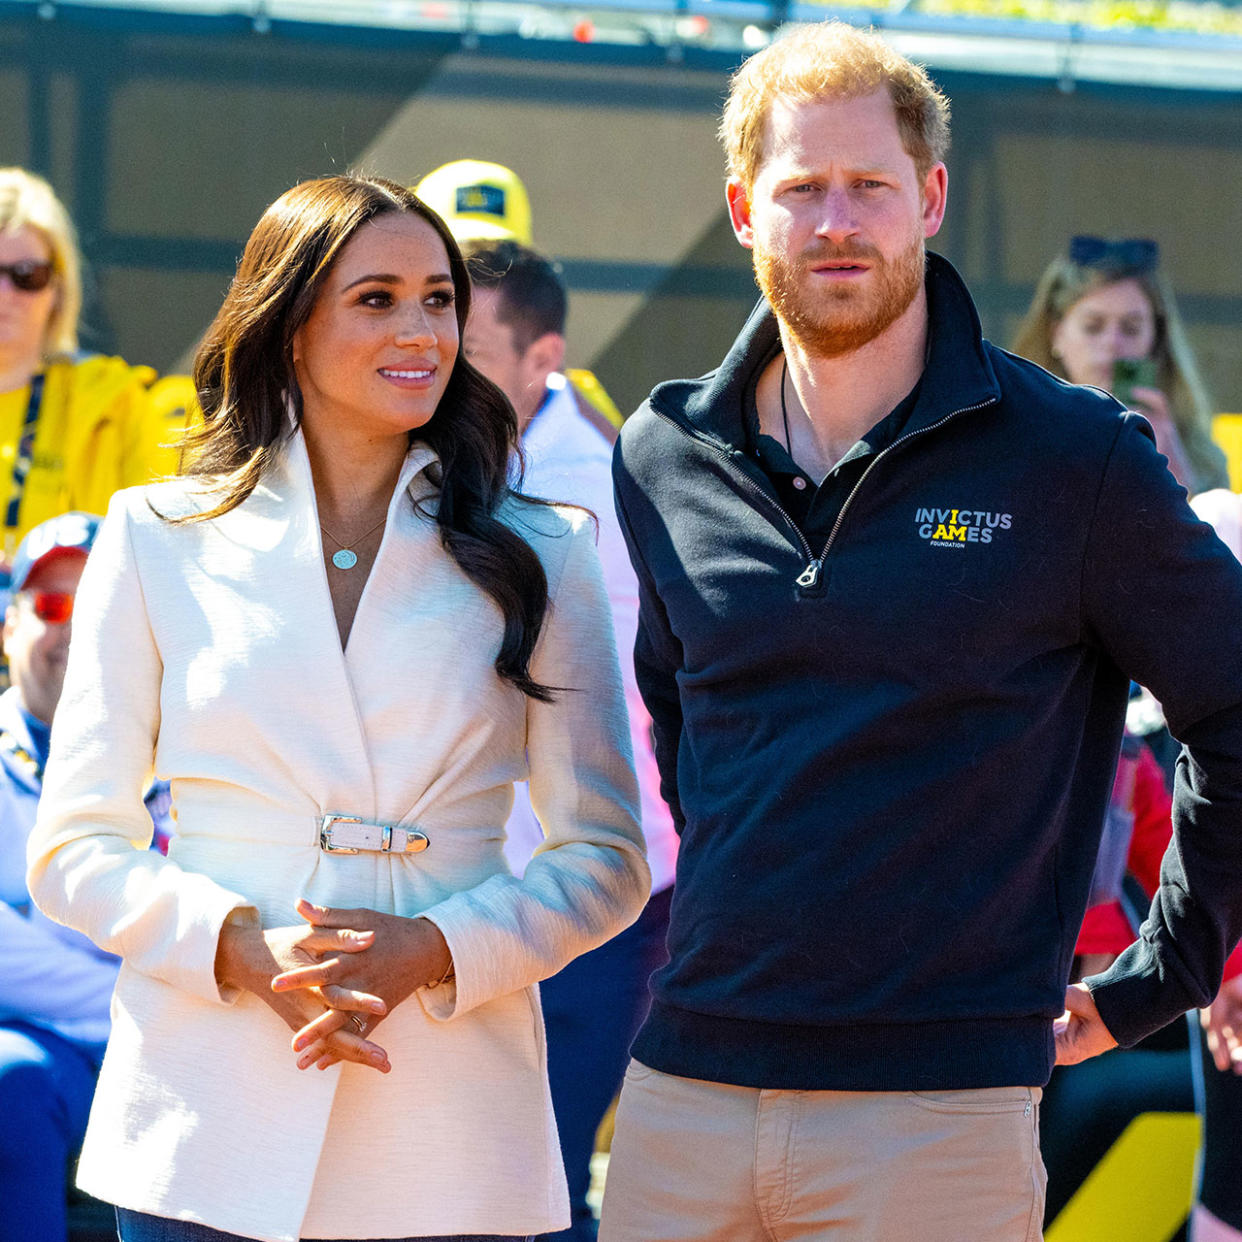 Meghan Markle and Prince Harry at the Invictus Games in The Hague